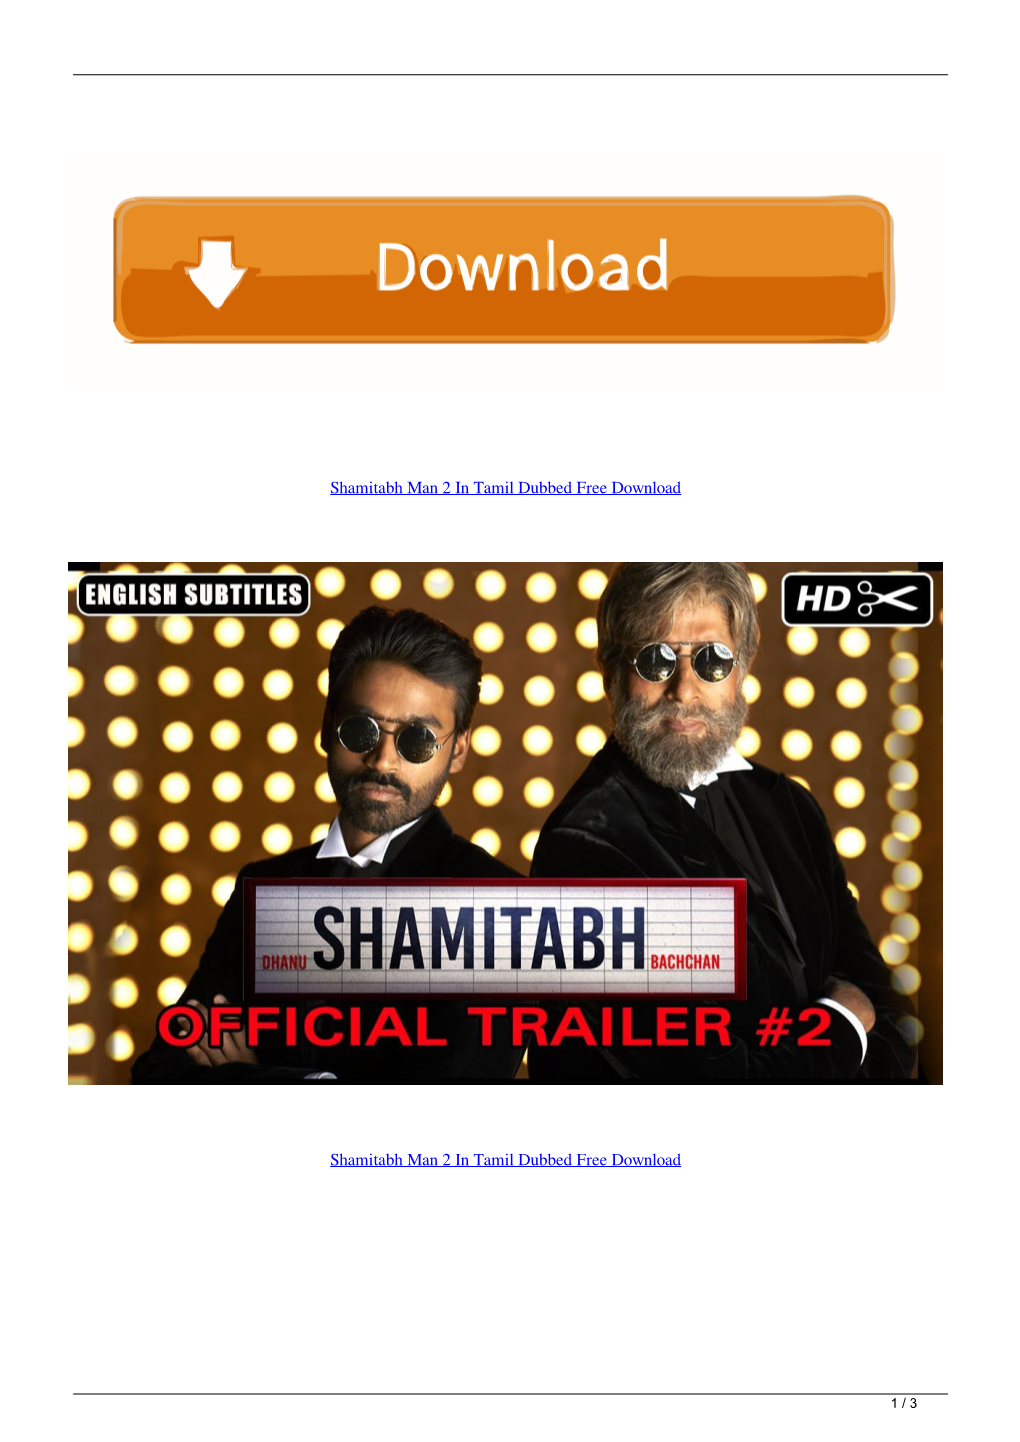 Shamitabh Man 2 in Tamil Dubbed Free Download